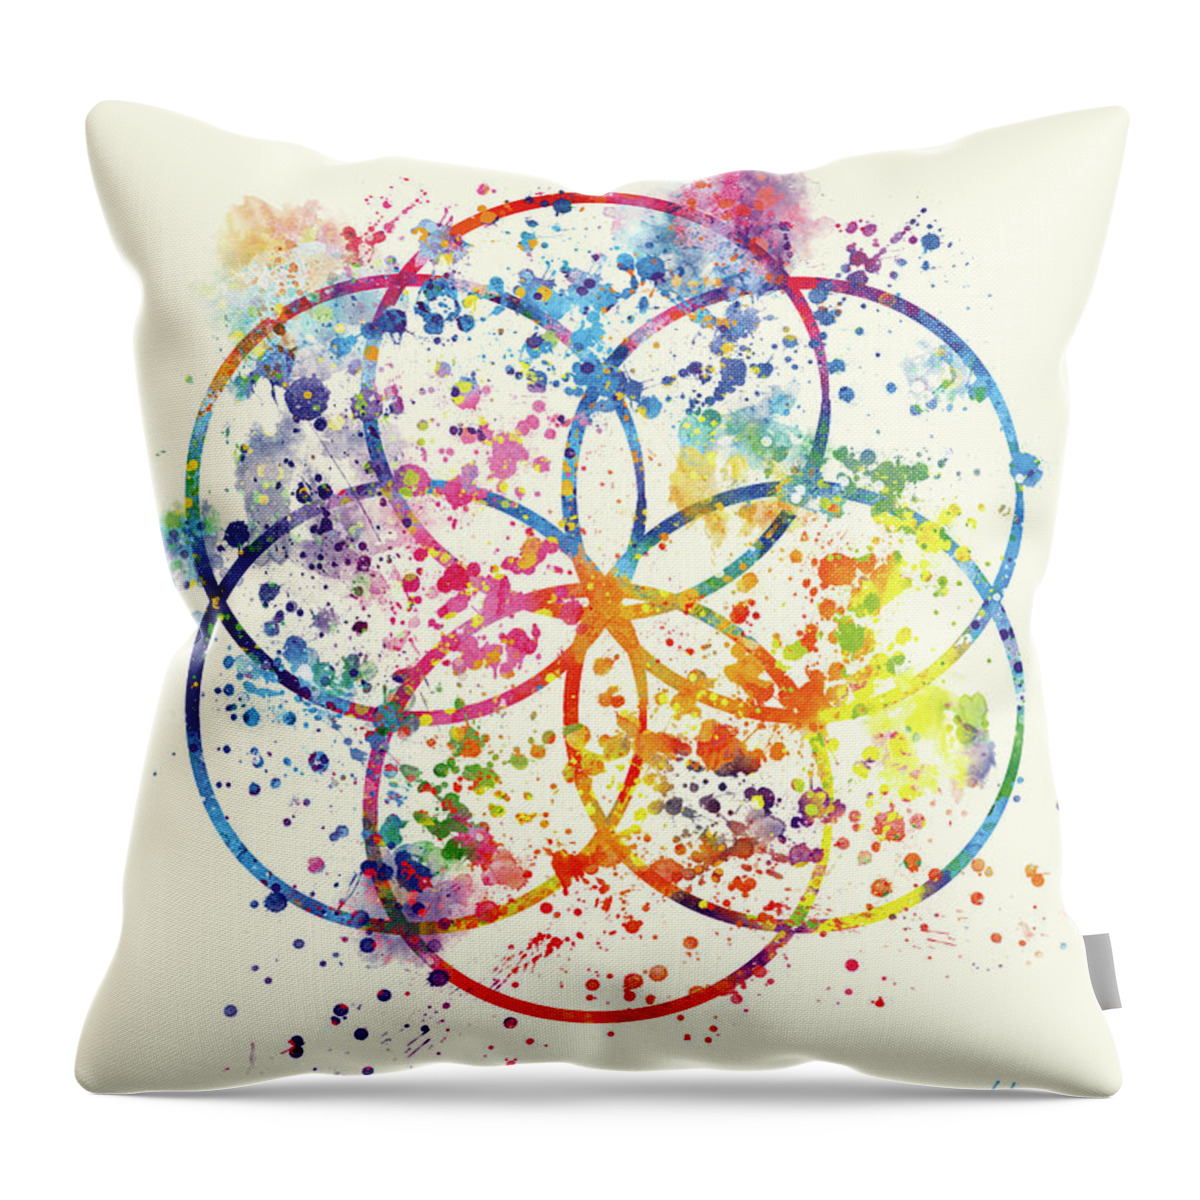 Watercolor Throw Pillow featuring the painting Watercolor - Sacred Geometry For Good Luck by Vart